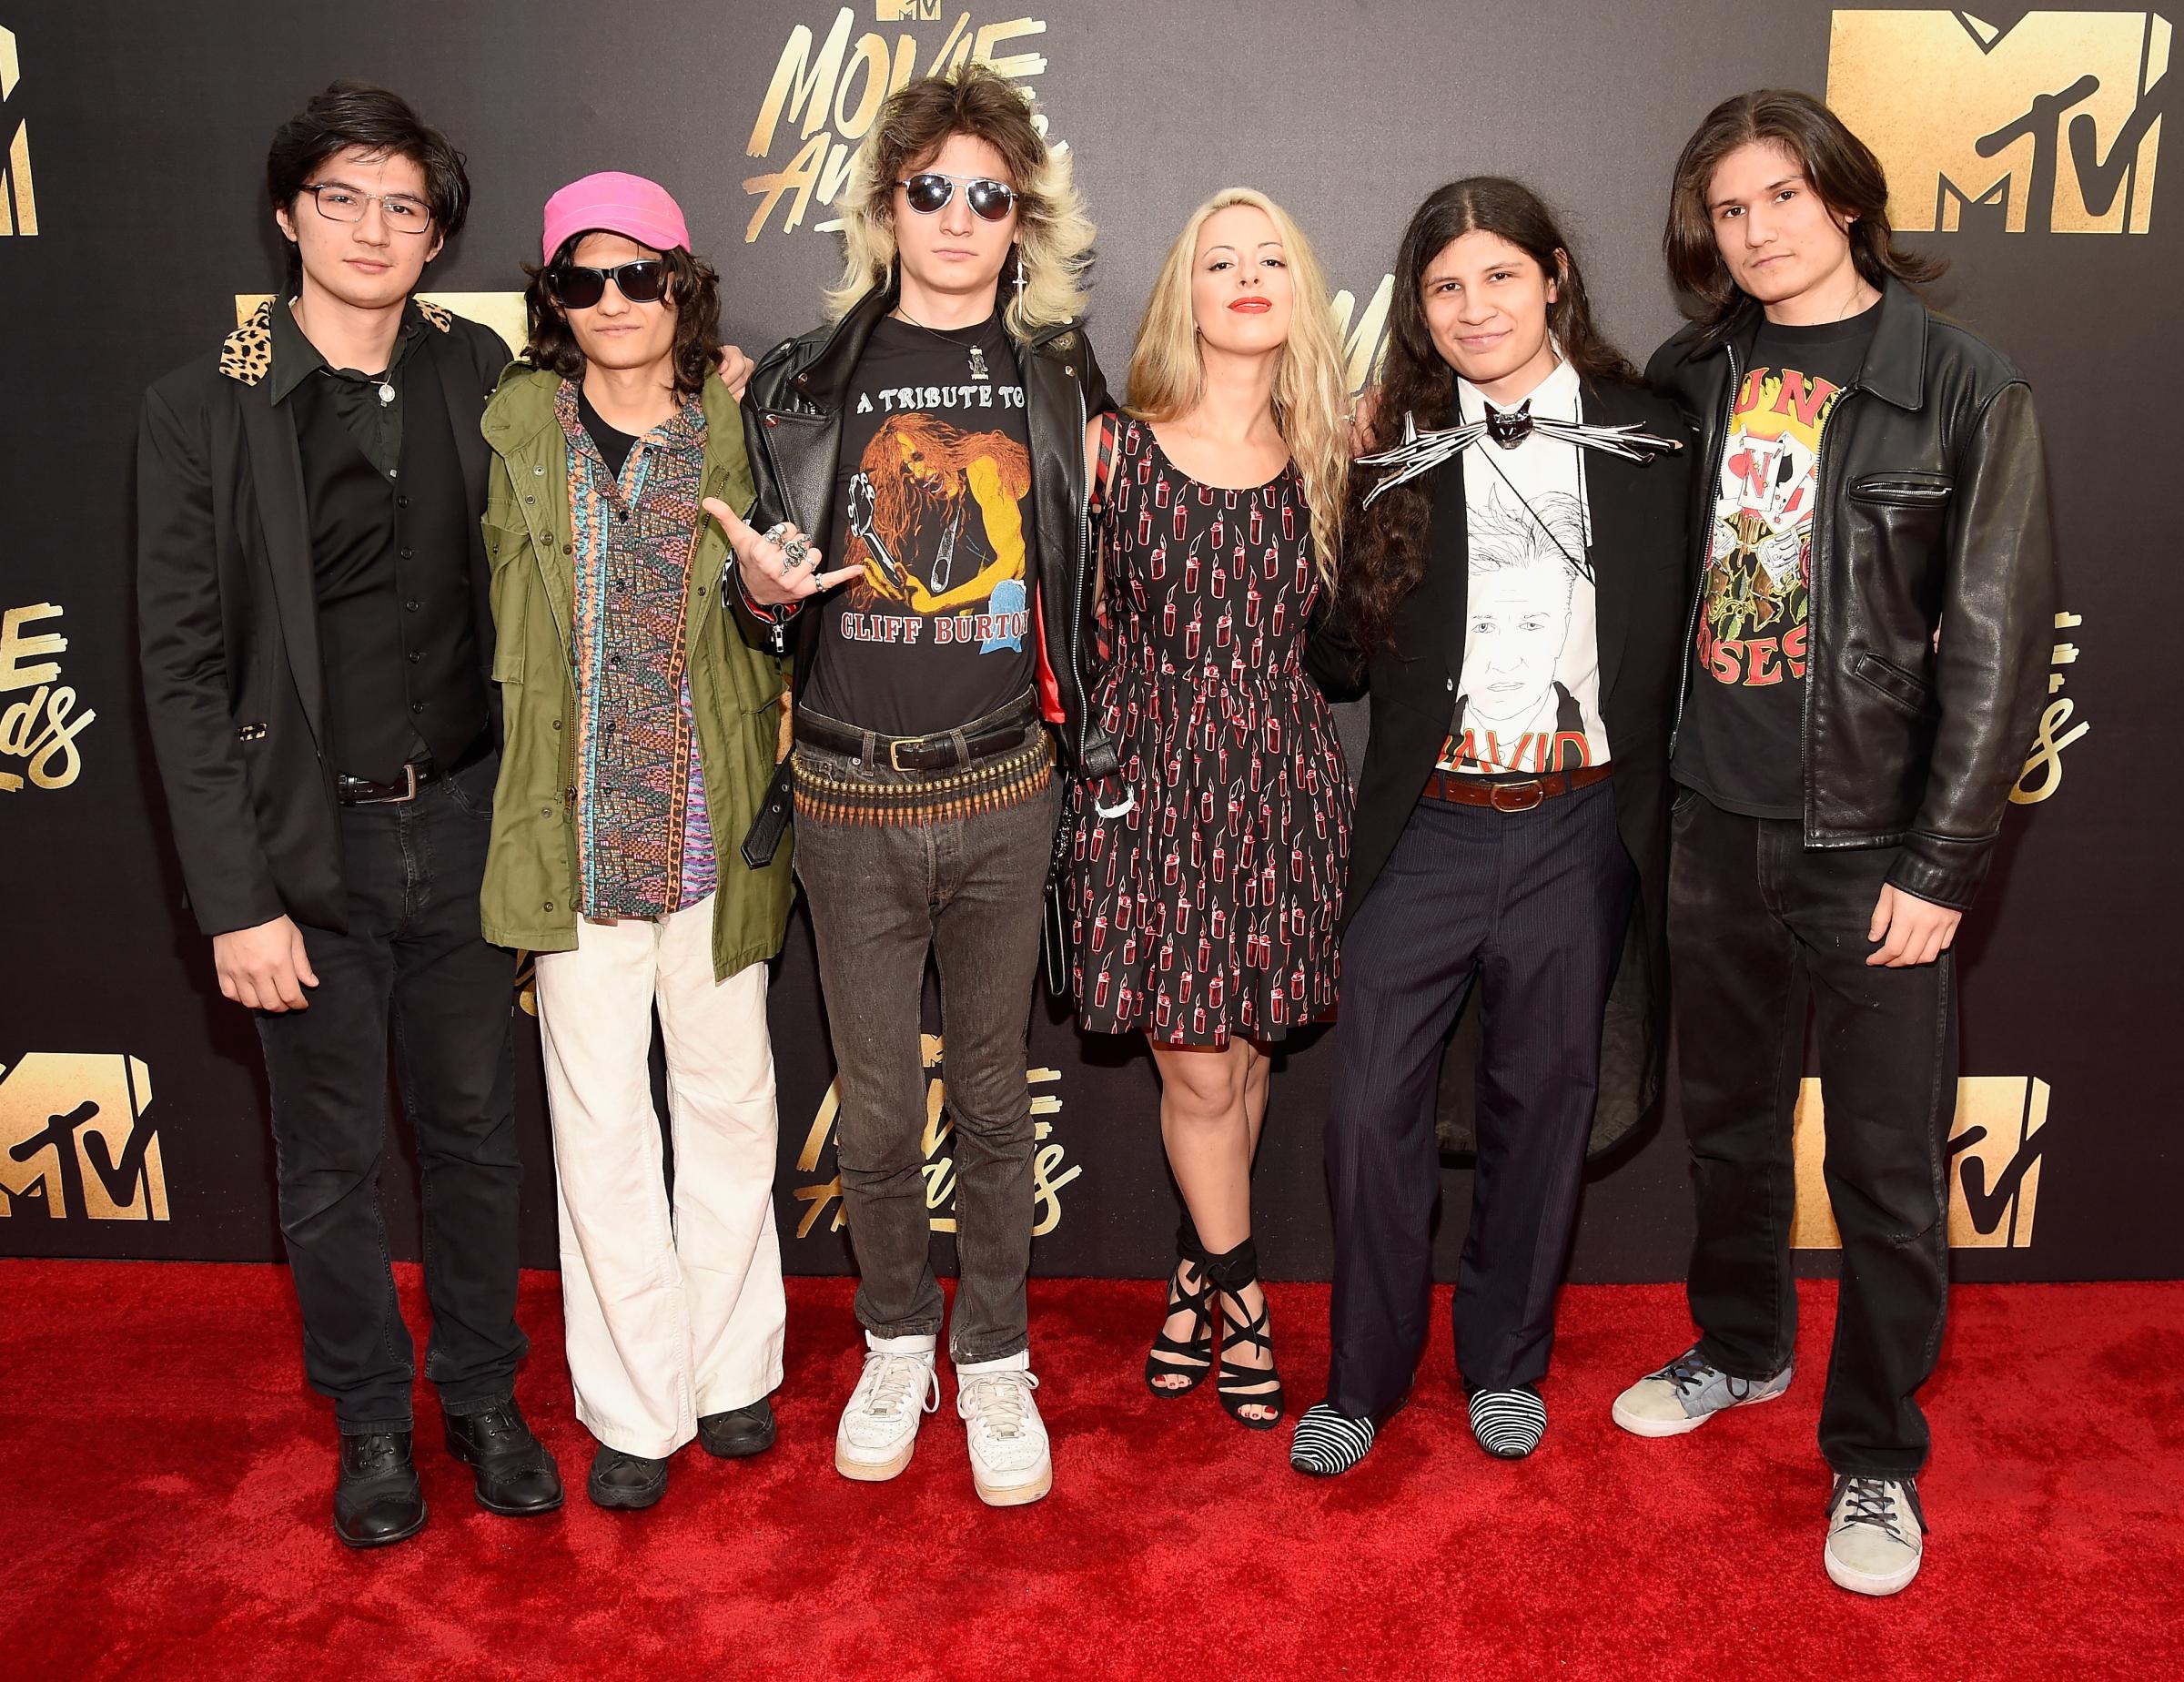 Director Crystal Moselle and "The Wolfpack" Angulo Brothers attend the 2016 MTV Movie Awards at Warner Bros. Studios on April 9, 2016 in Burbank, Calif.